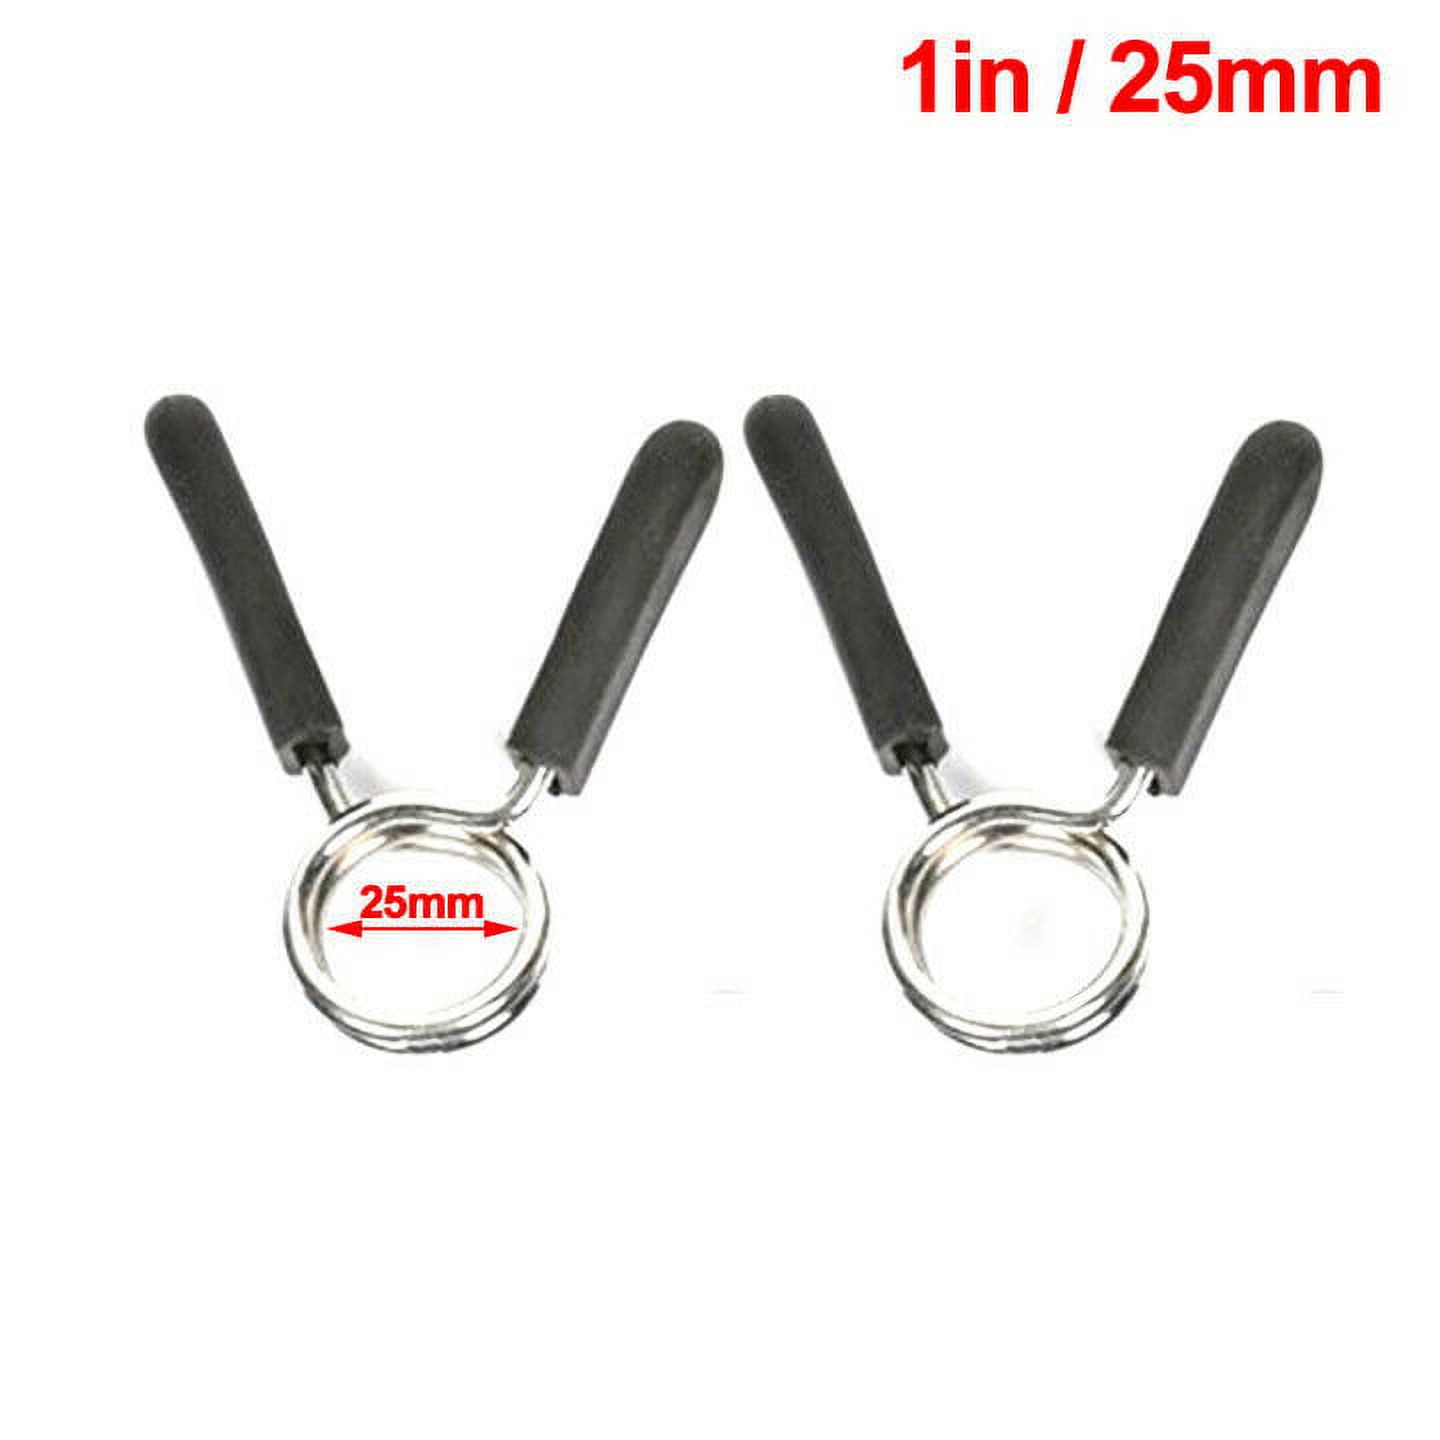 Datingday 2pcs 1in/2in Lock Jaw Collars Olympic Barbells Muscle Clamps Bar Weights Lifting - image 1 of 7